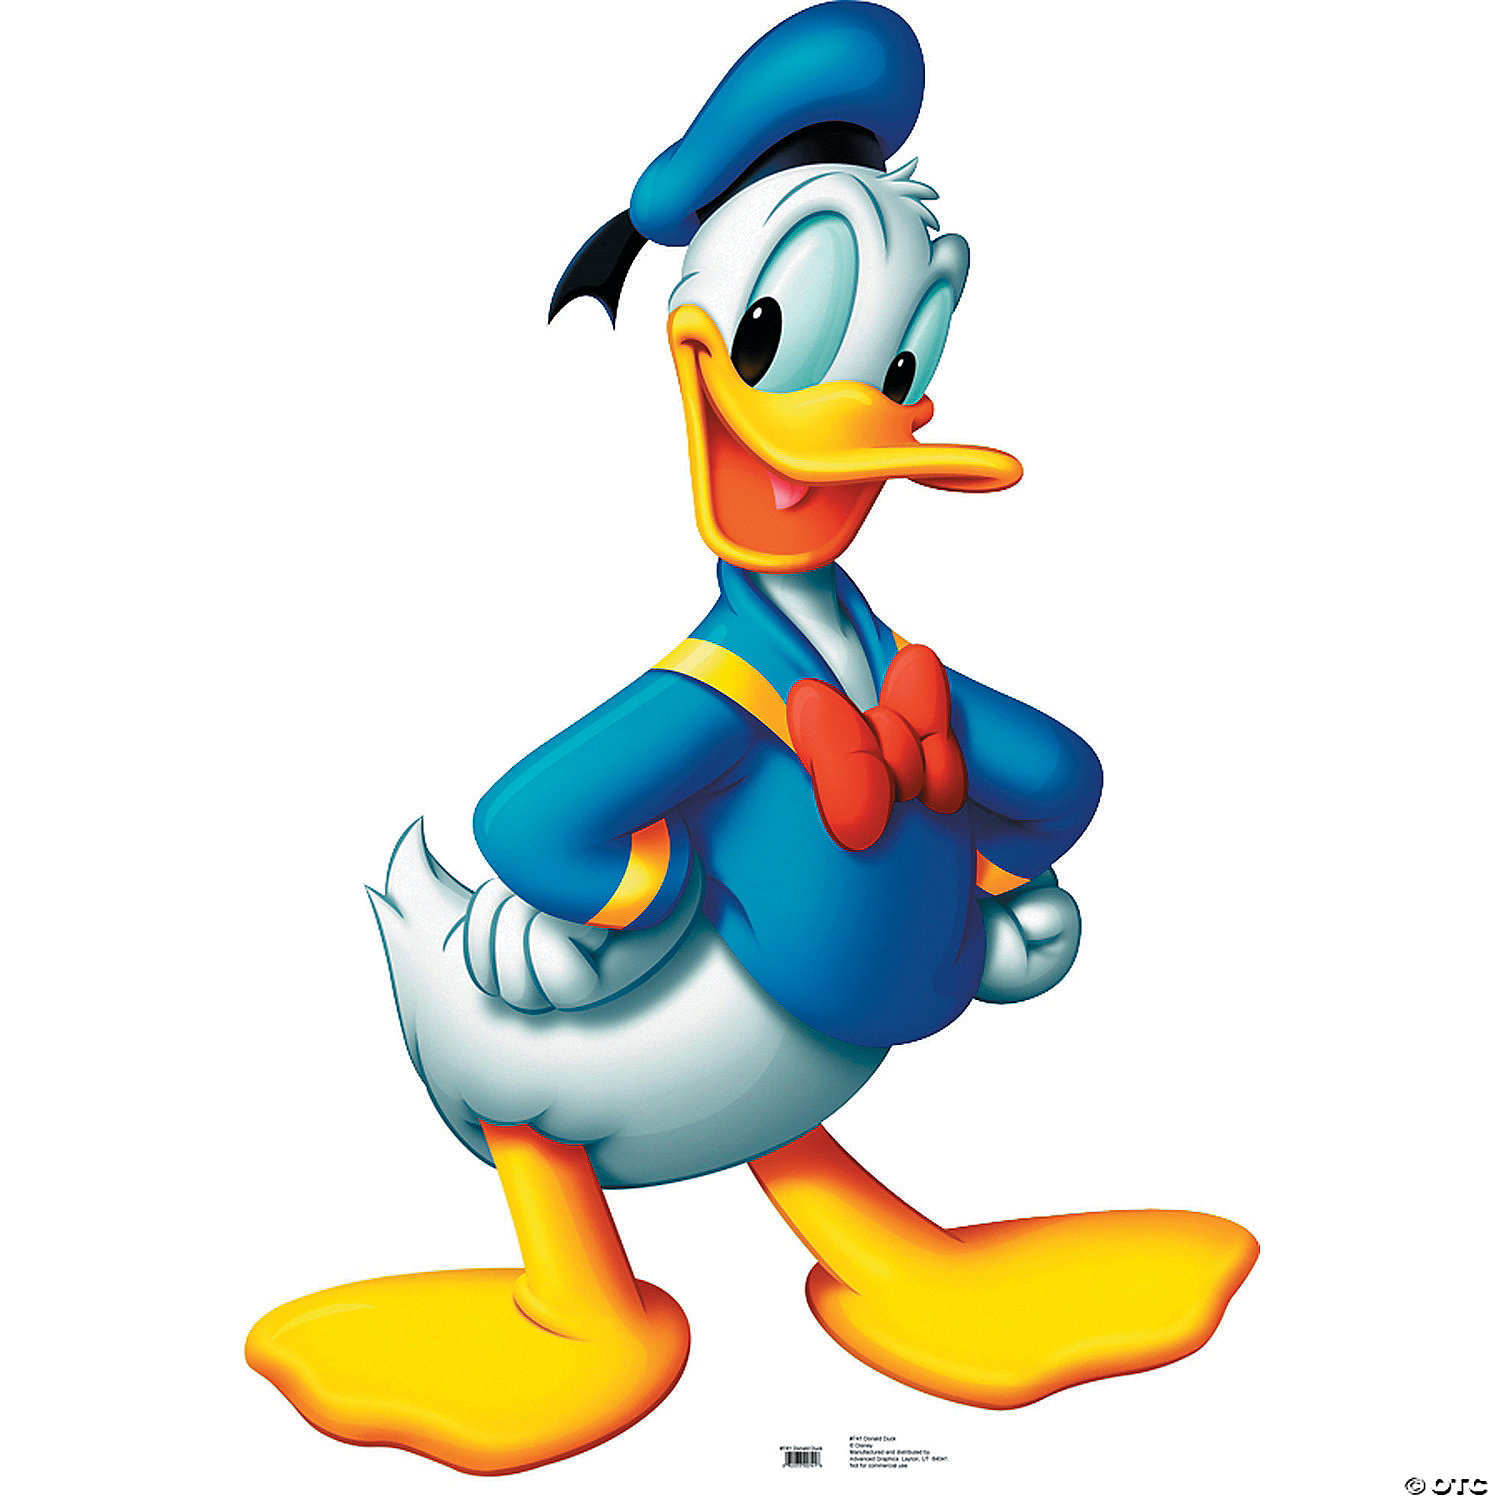 Donald Duck Picture